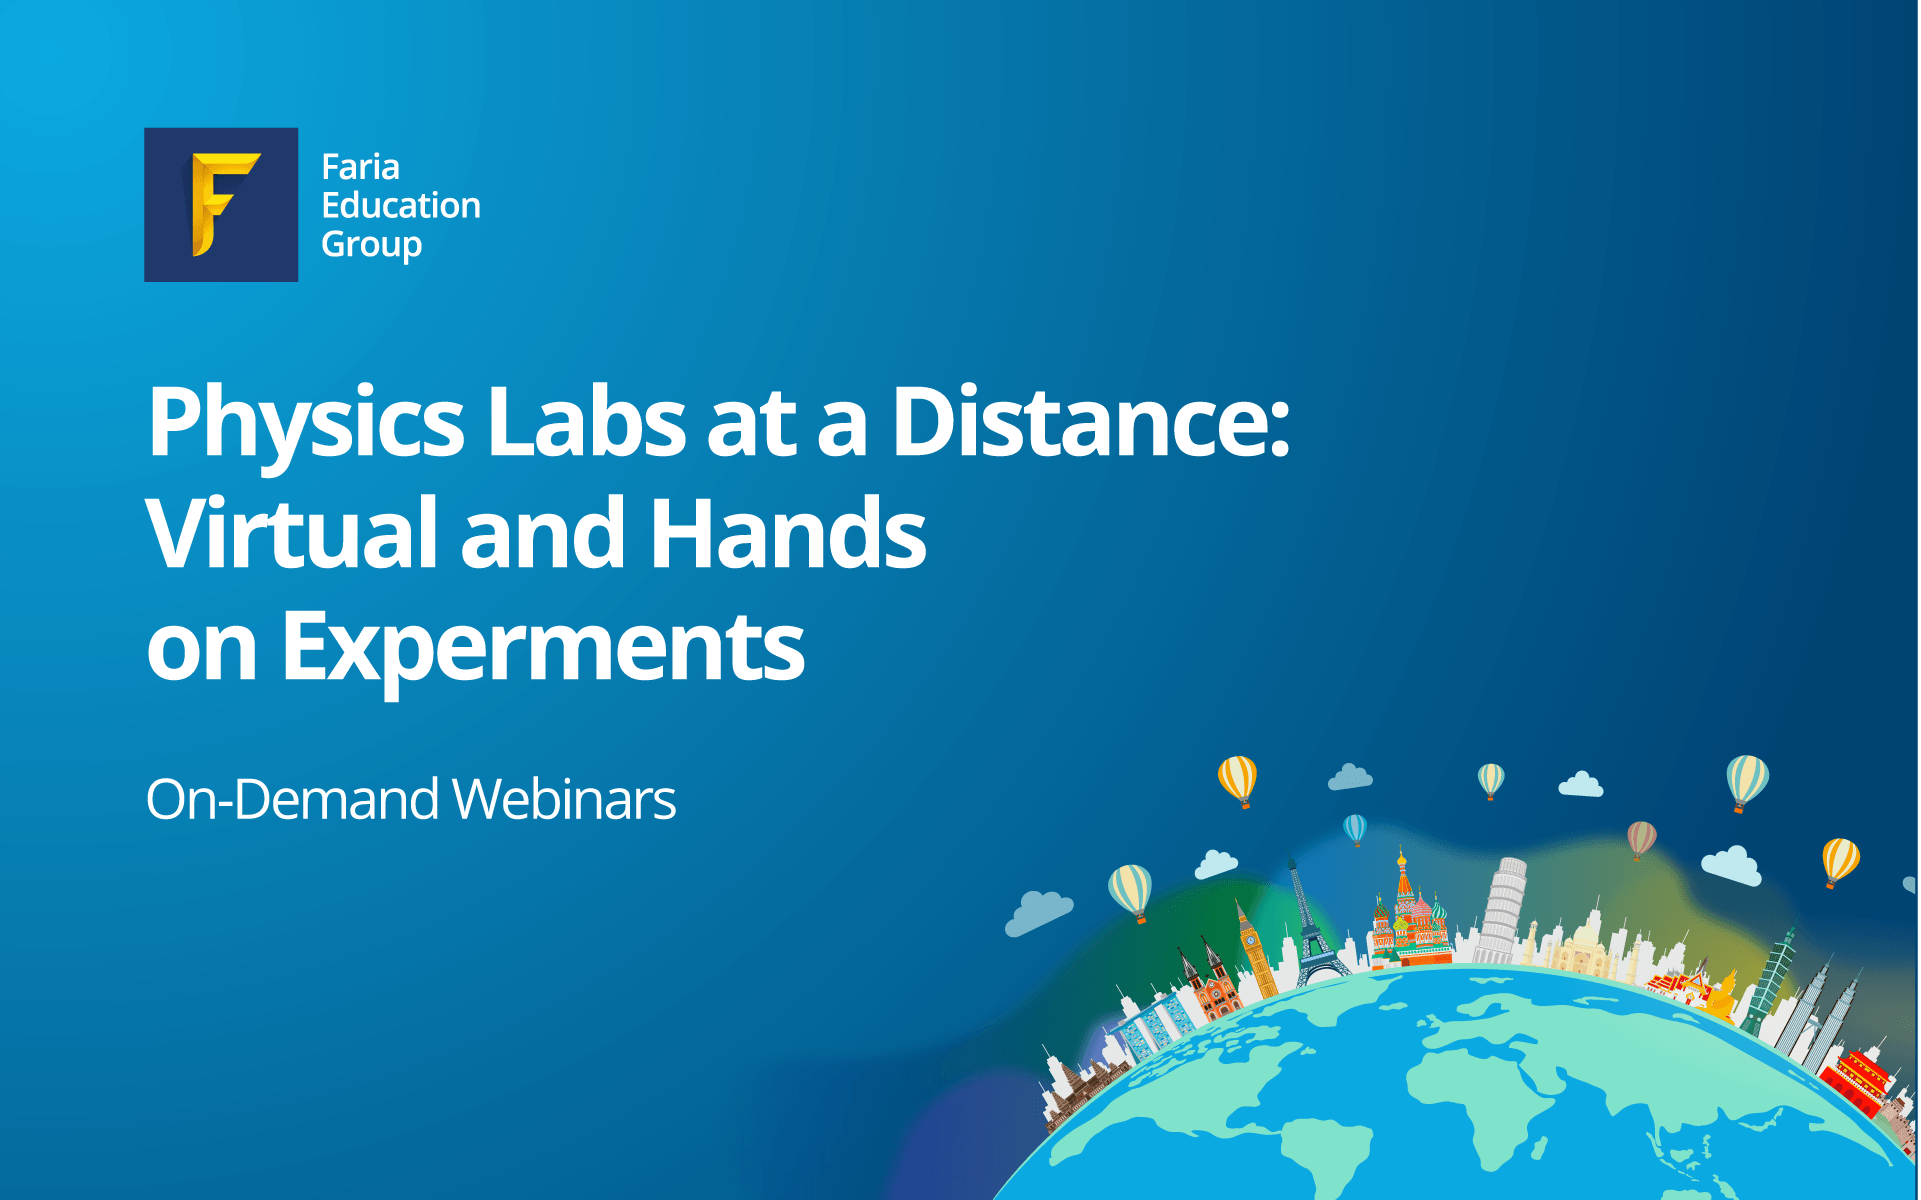 Physics labs at a distance: virtual and hands on experiments